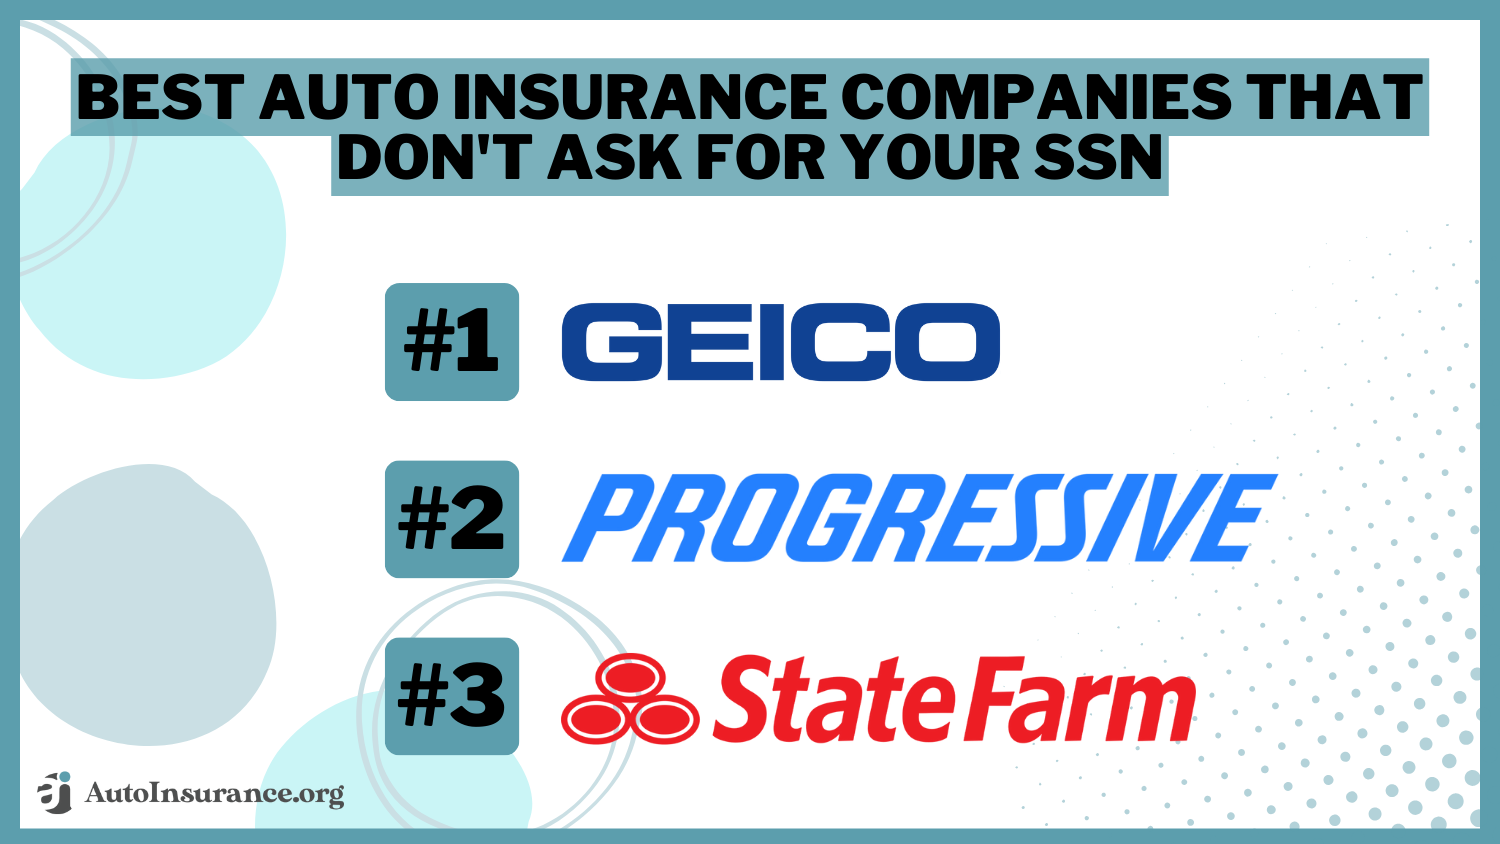 Best Auto Insurance Companies That Don't Ask for Your SSN: Geico, Progressive, and State Farm